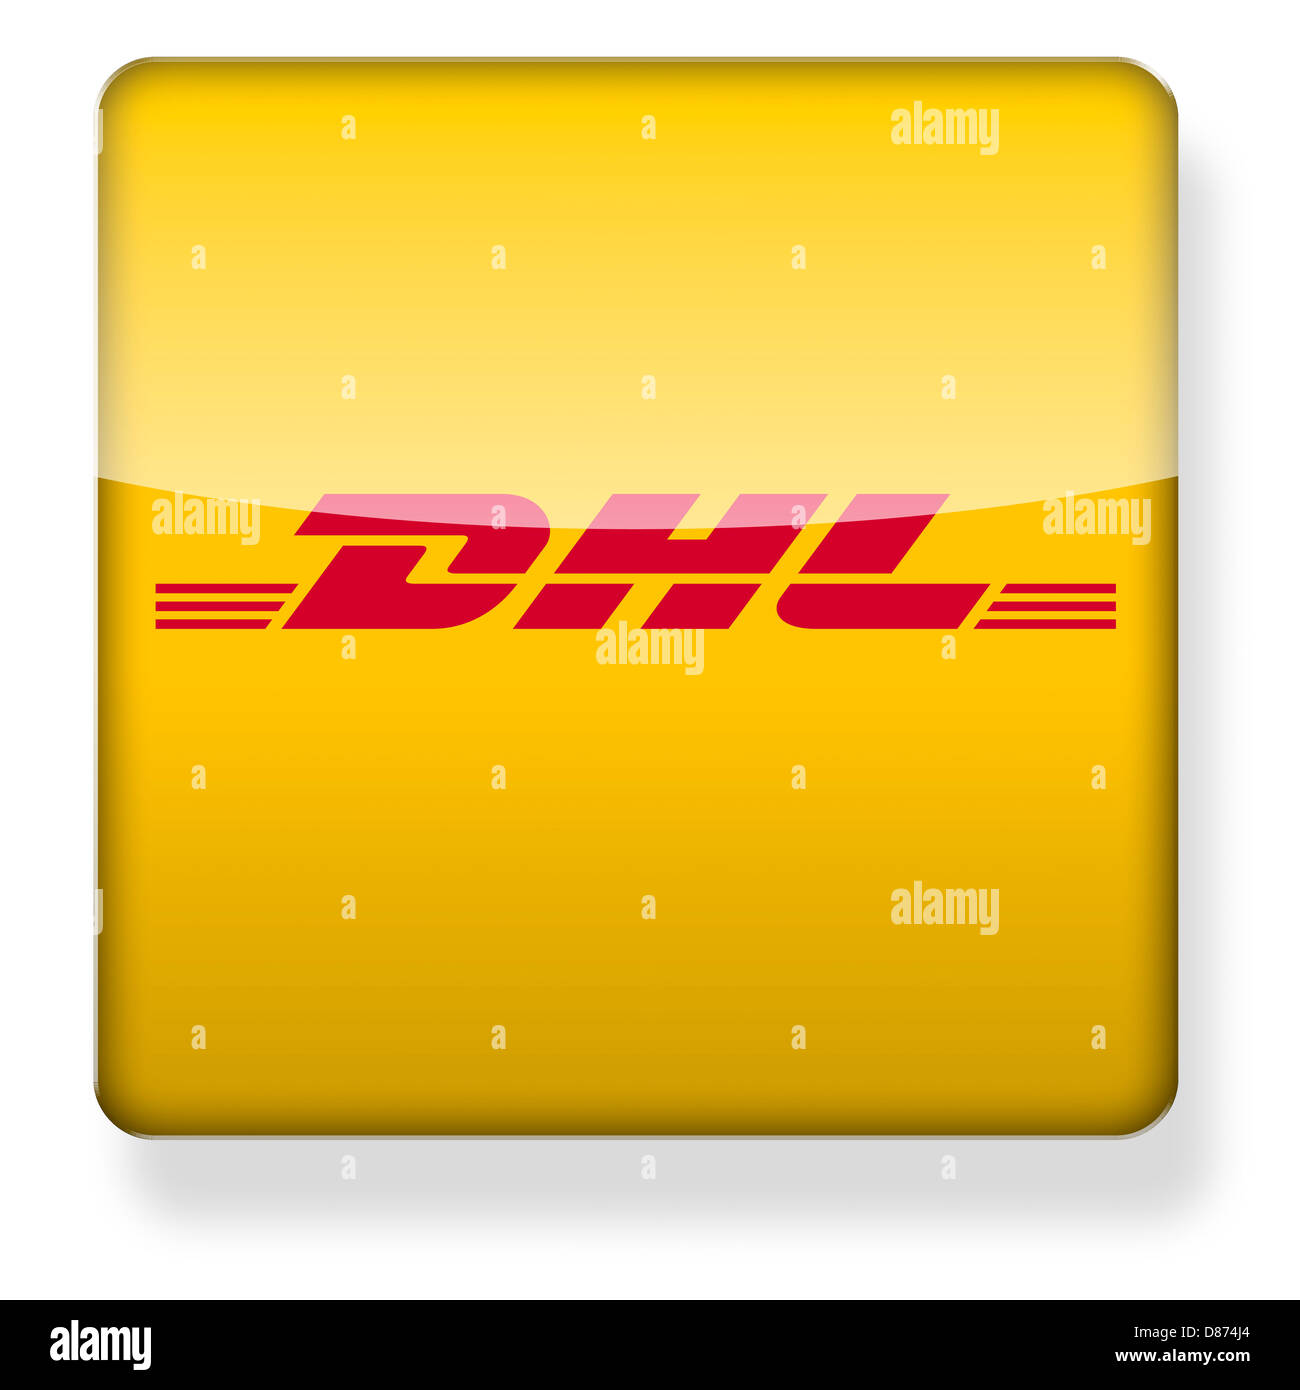 DHL logo as an app icon. Clipping path included Stock Photo - Alamy